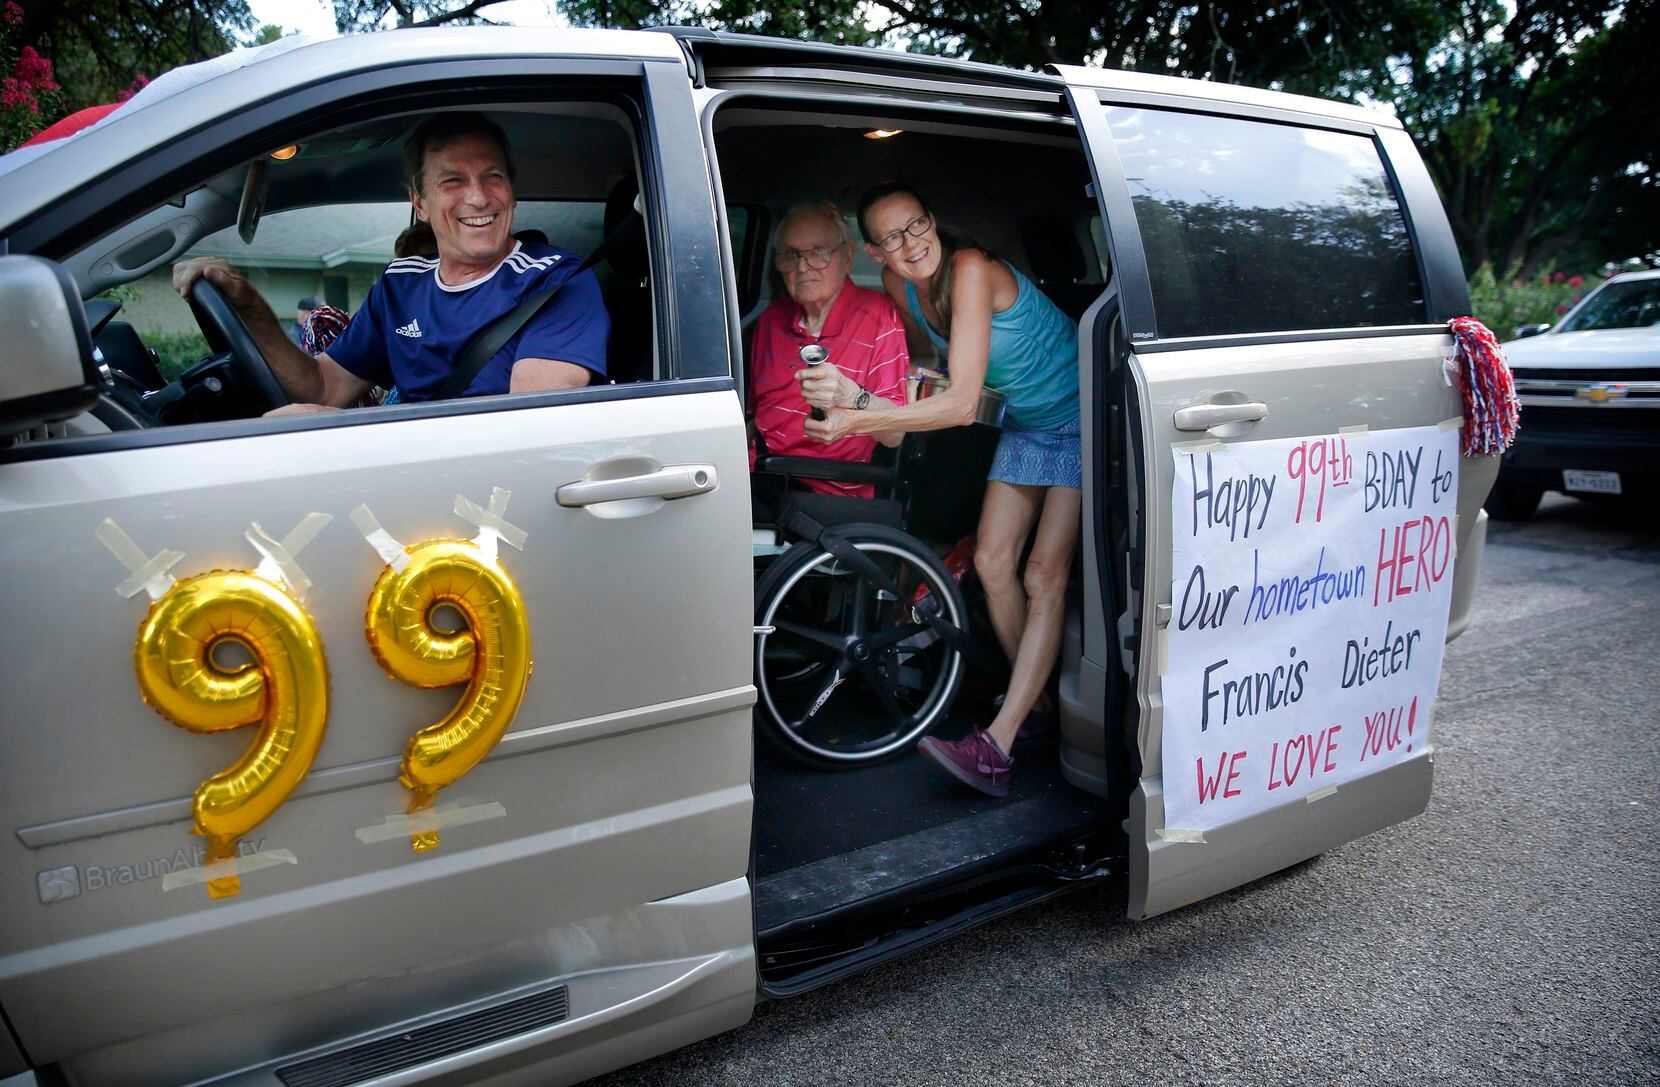 Pat Doyle (left) and his wife, Dianne Doyle, and Dianne's father Michael Wright passed by to...